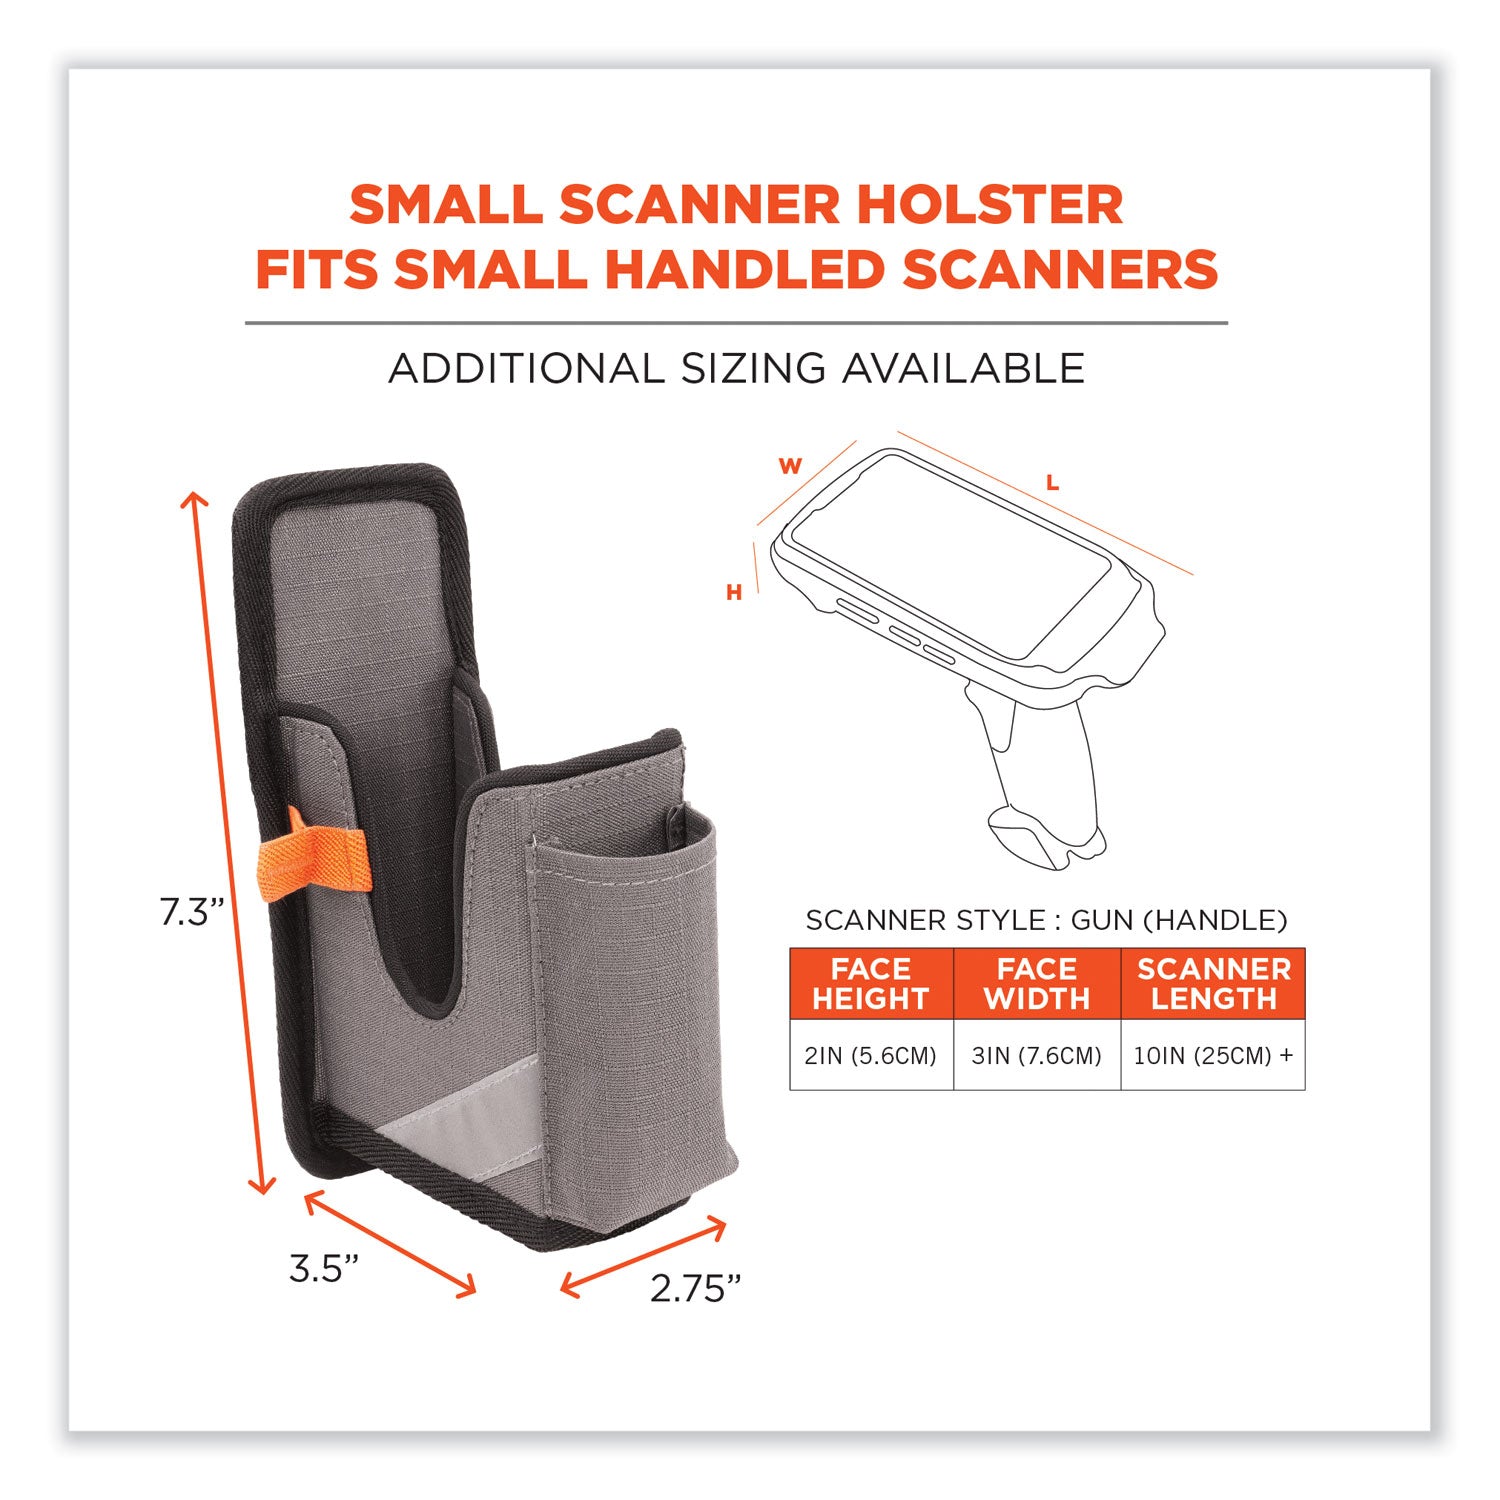 squids-5541-handheld-barcode-scanner-holster-w-belt-clip-2-comp-275-x-35-x-73-polyestergrayships-in-1-3-business-days_ego19182 - 2